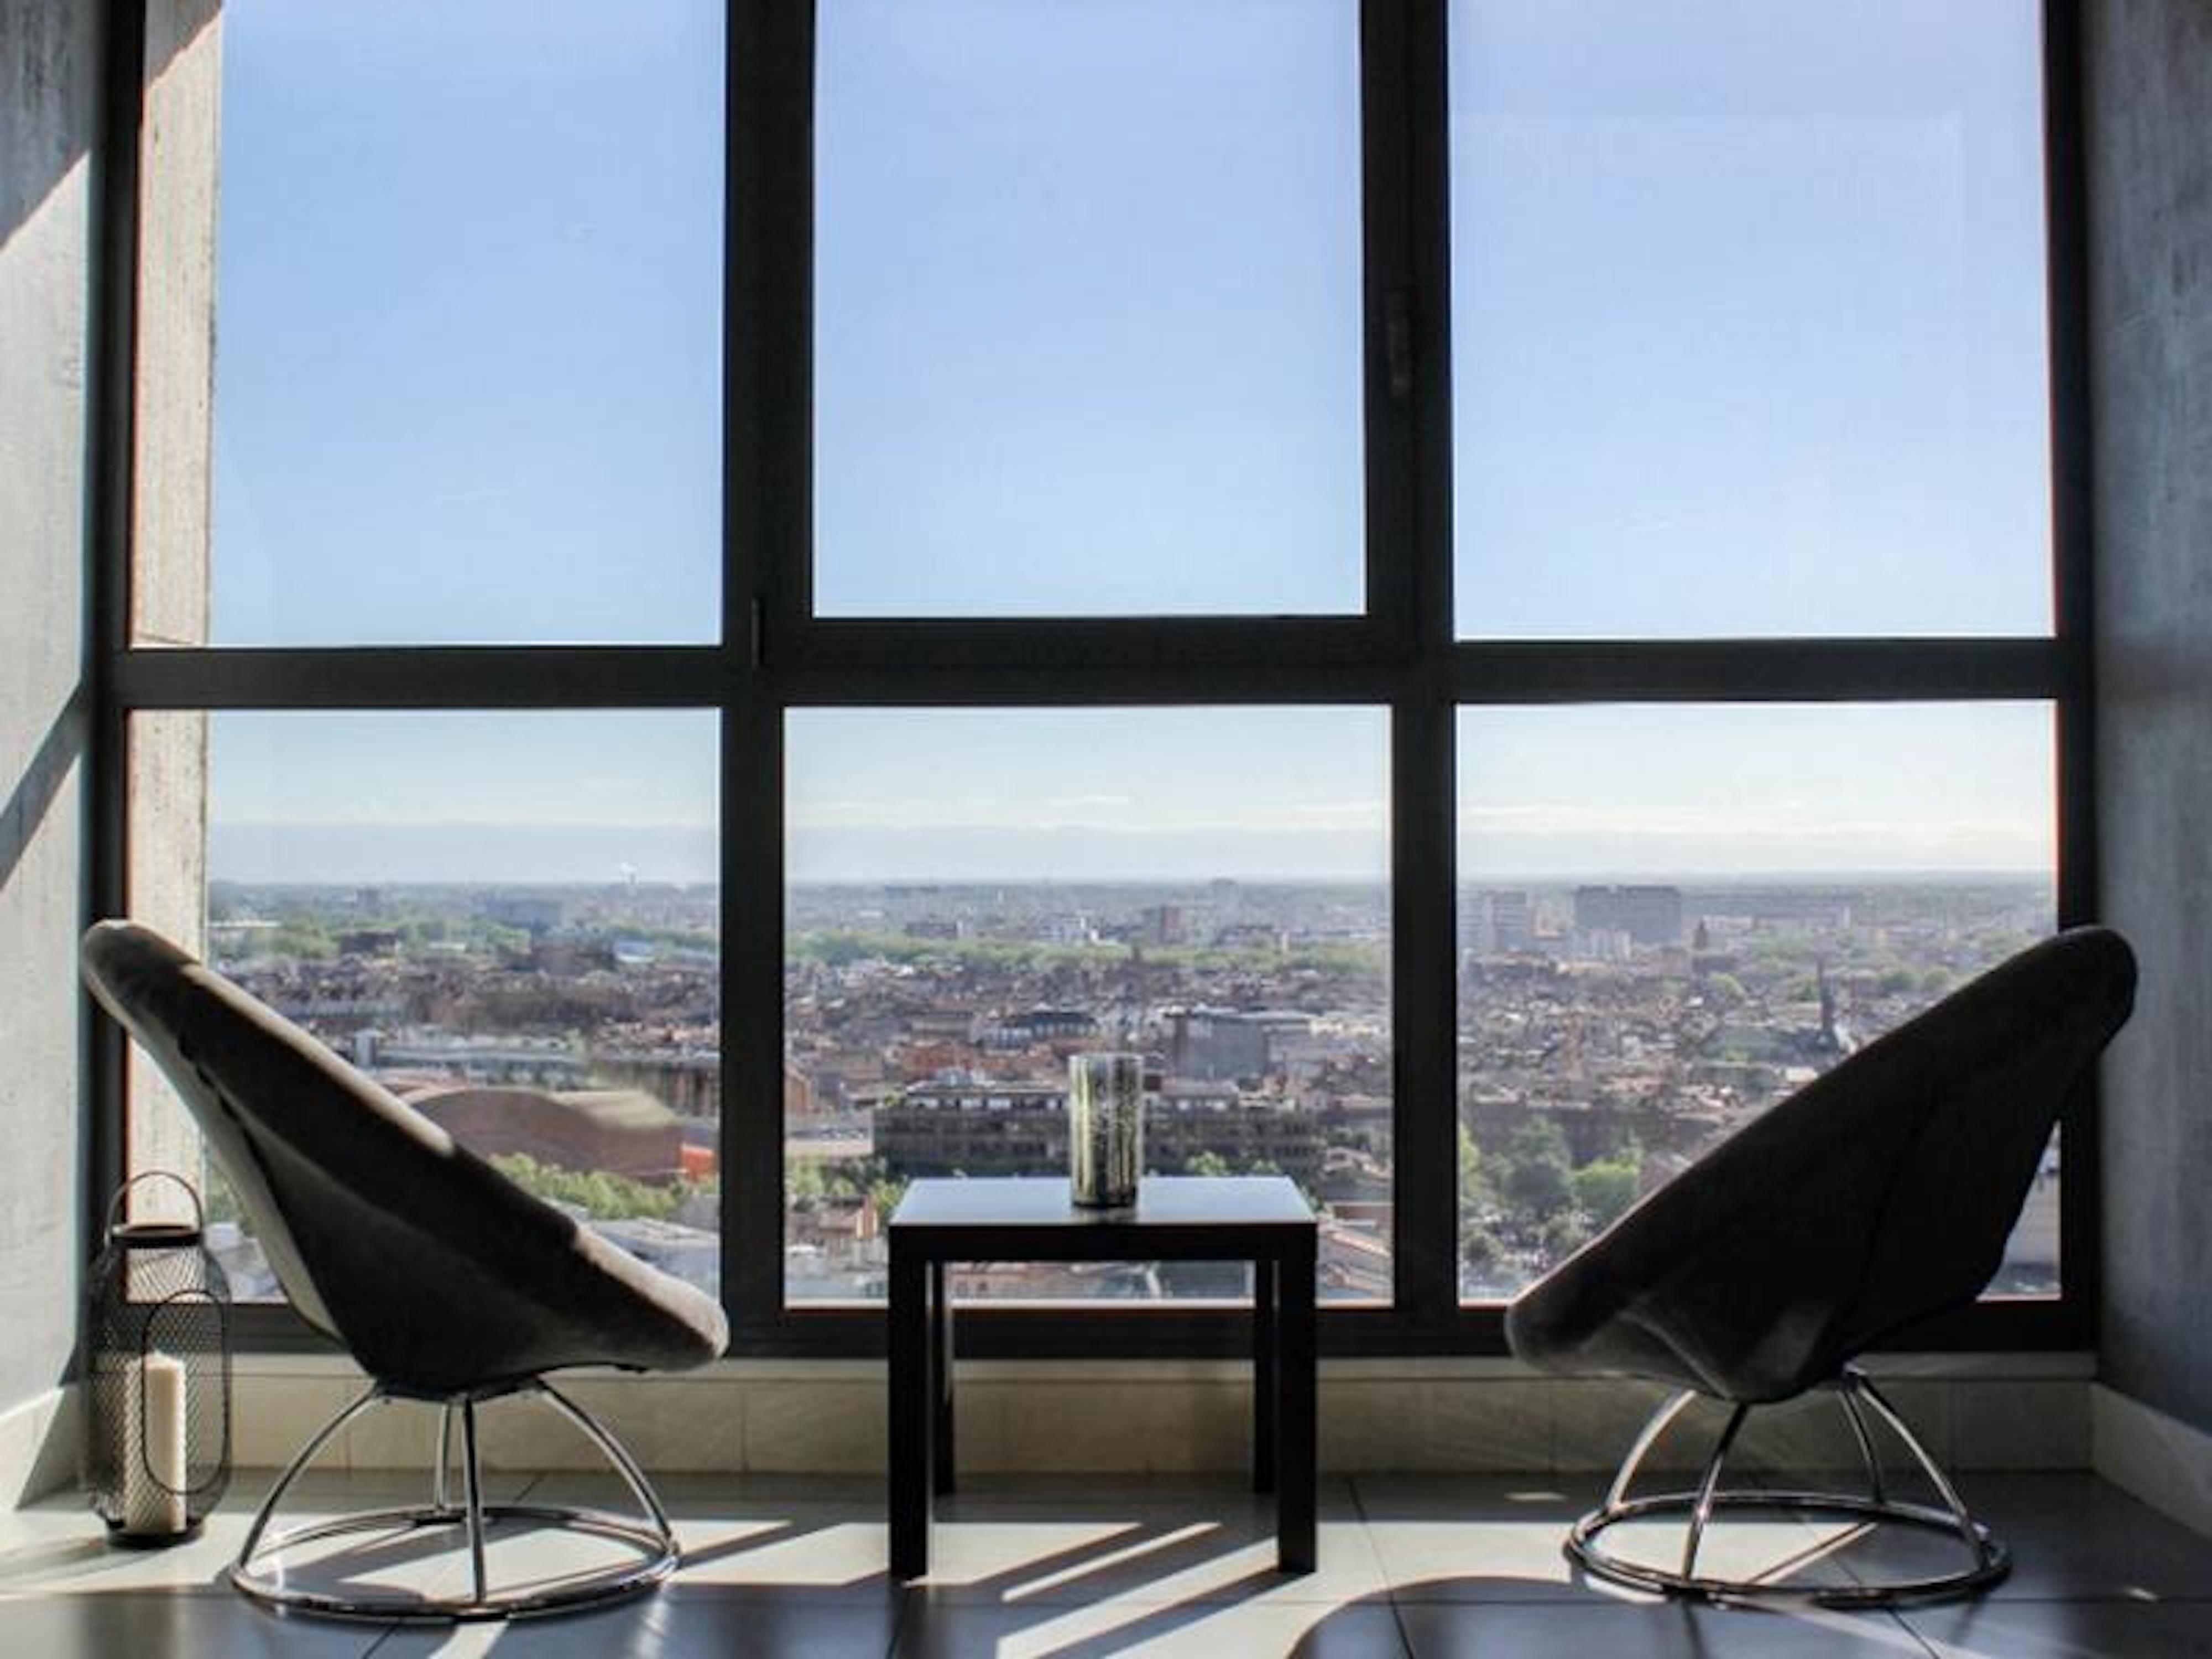 Property Image 1 - Penthouse Toulouse centre with spectacular views - by feelluxuryholidays